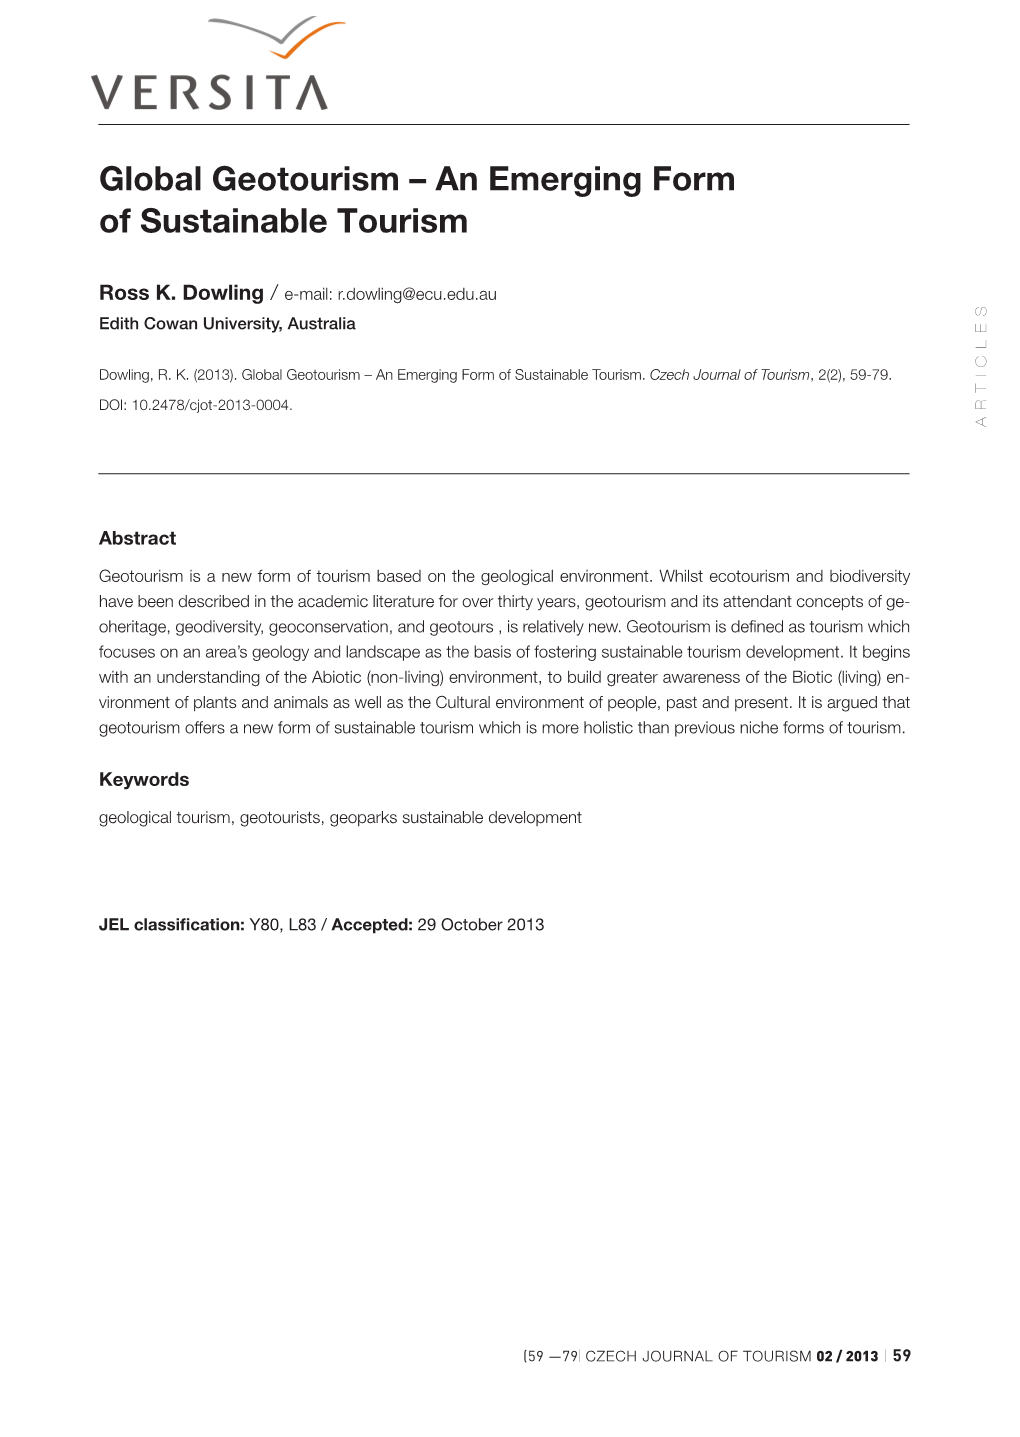 Global Geotourism – an Emerging Form of Sustainable Tourism